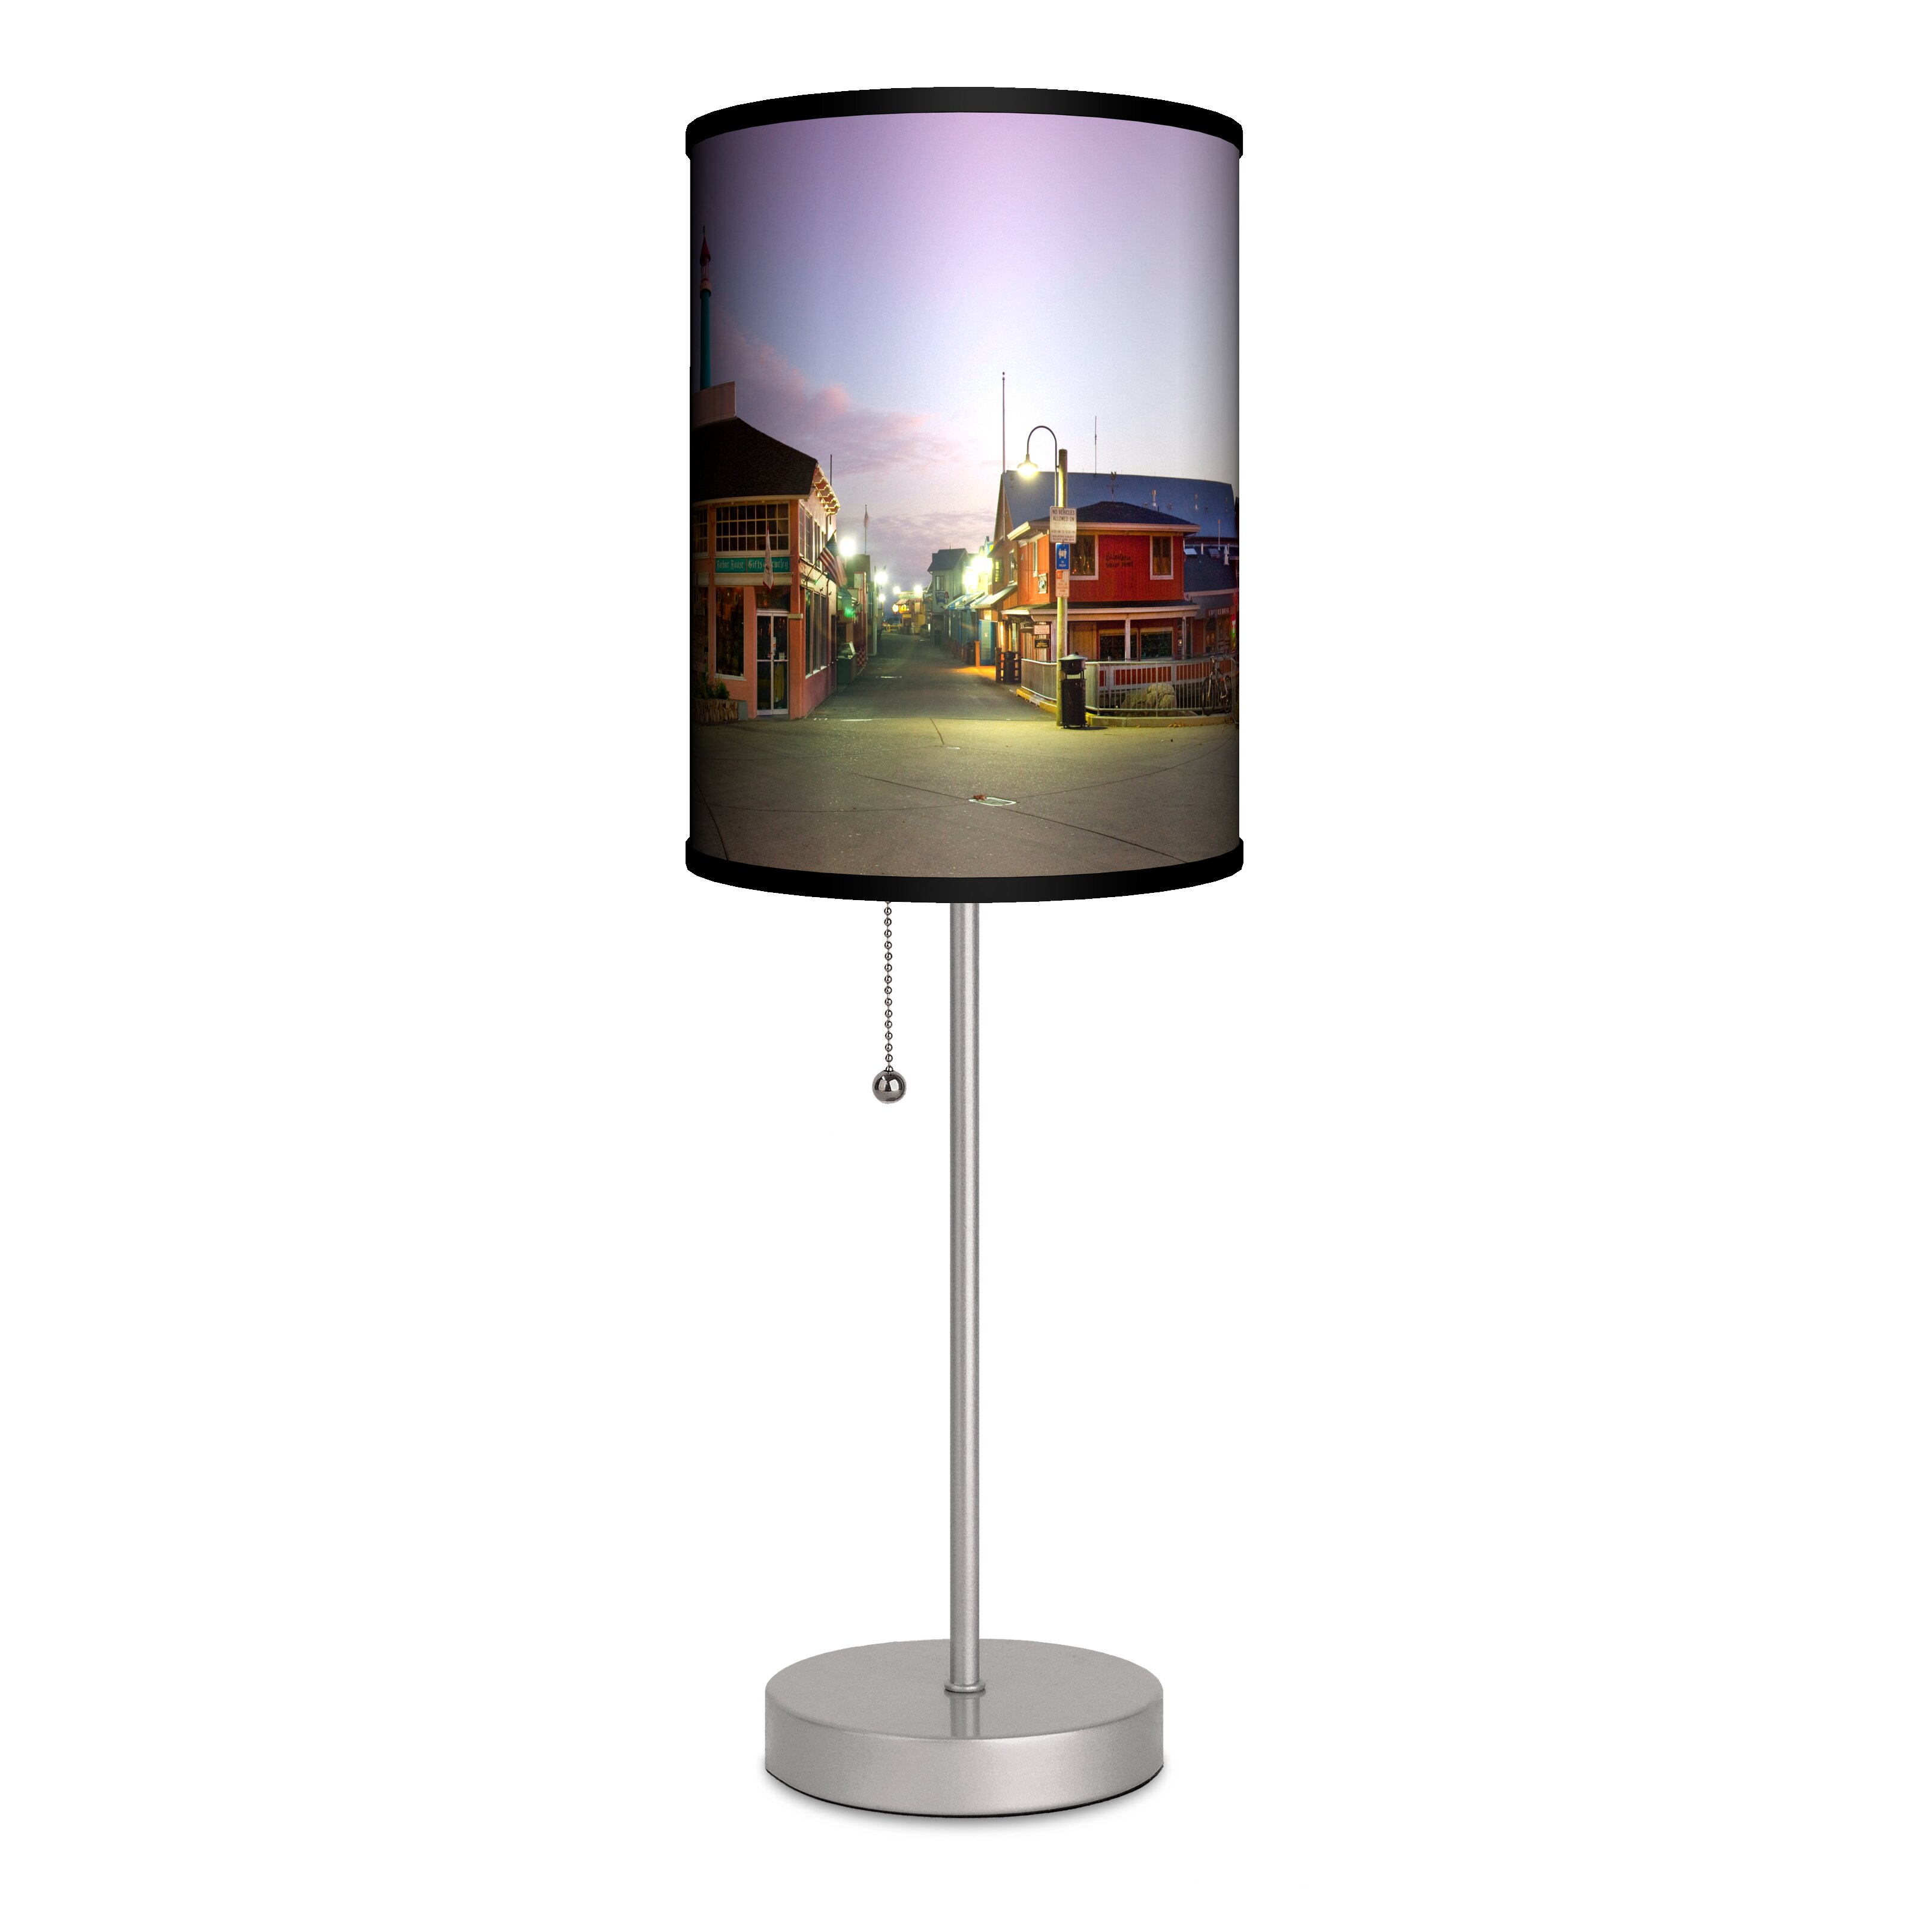 Lamp In A Box Artist Sean Davey Monterey 2 20 H Table Lamp with